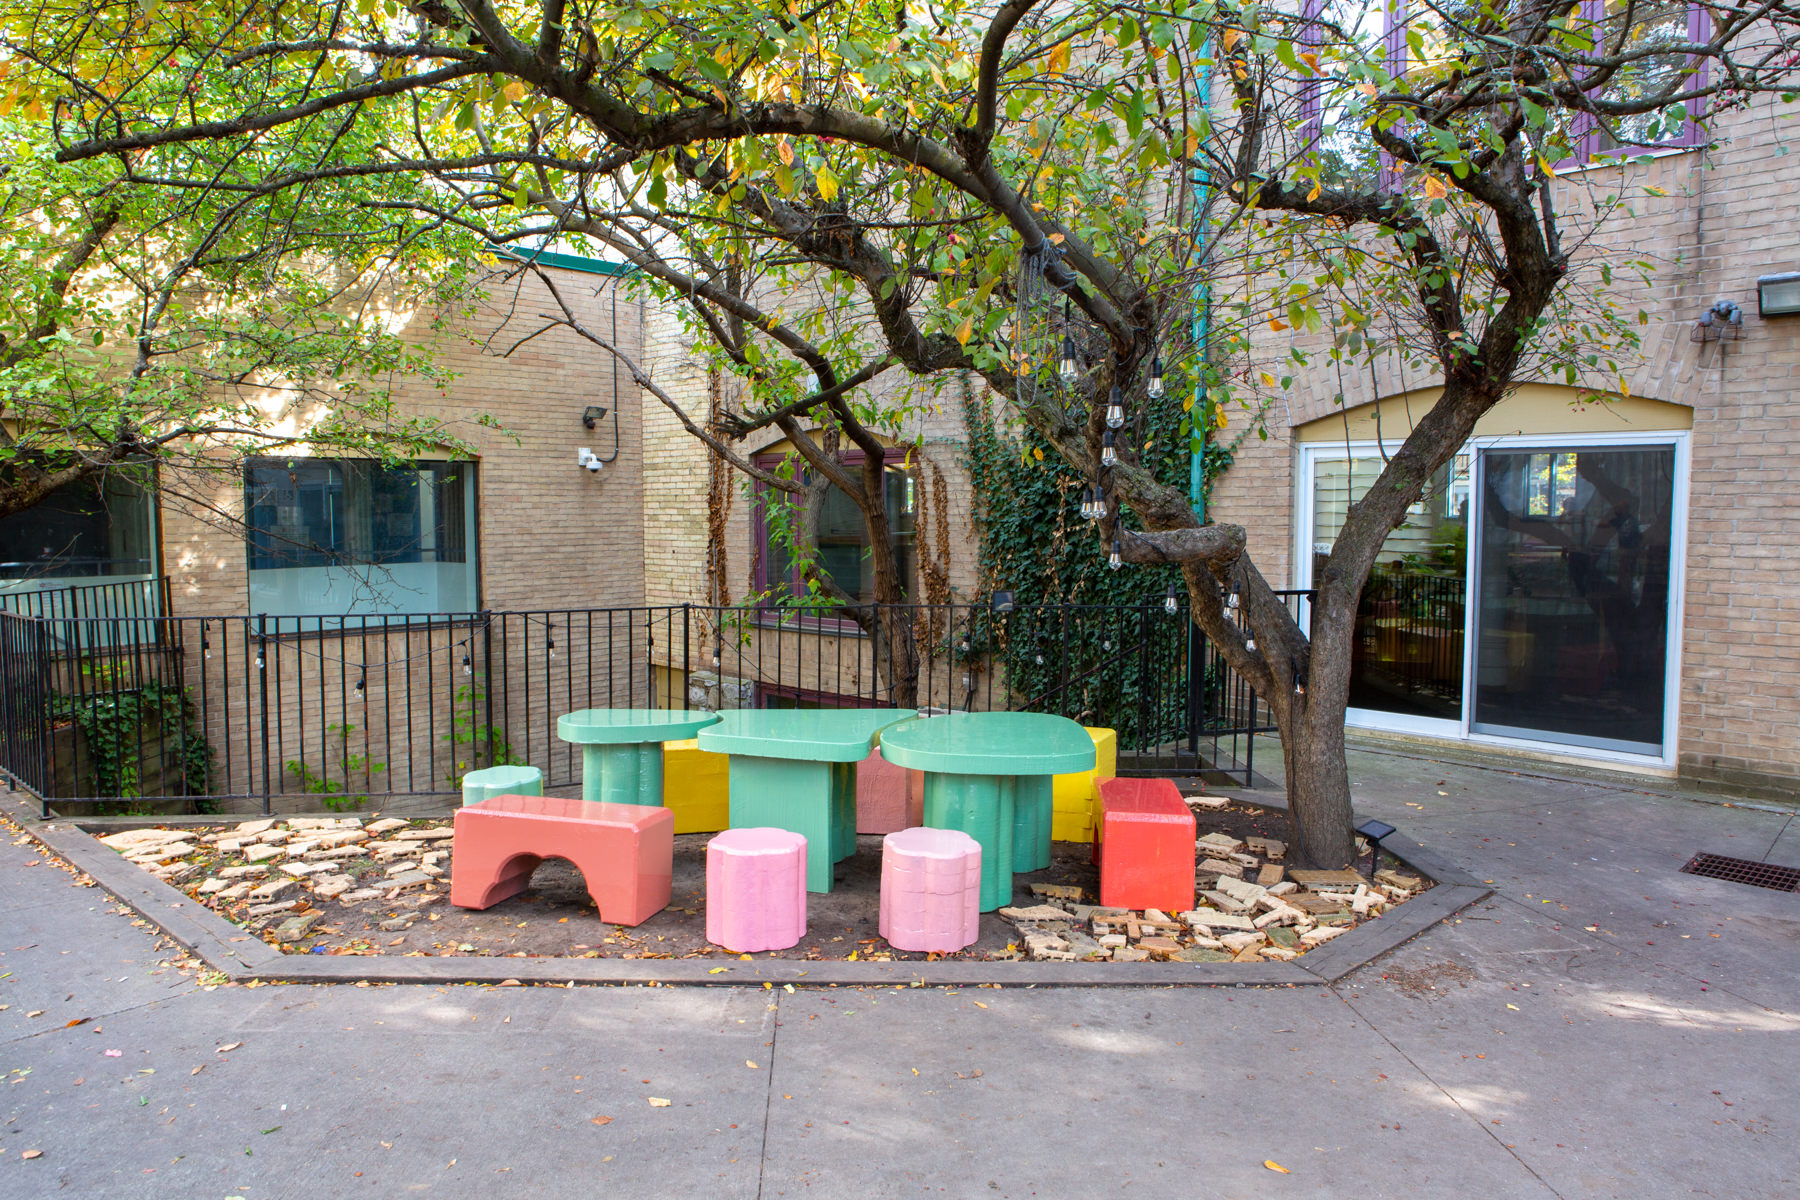 A select few colourful blocks from Cecil Community Planting Imagination project are neatly arranged in a courtyard on a sunny day.